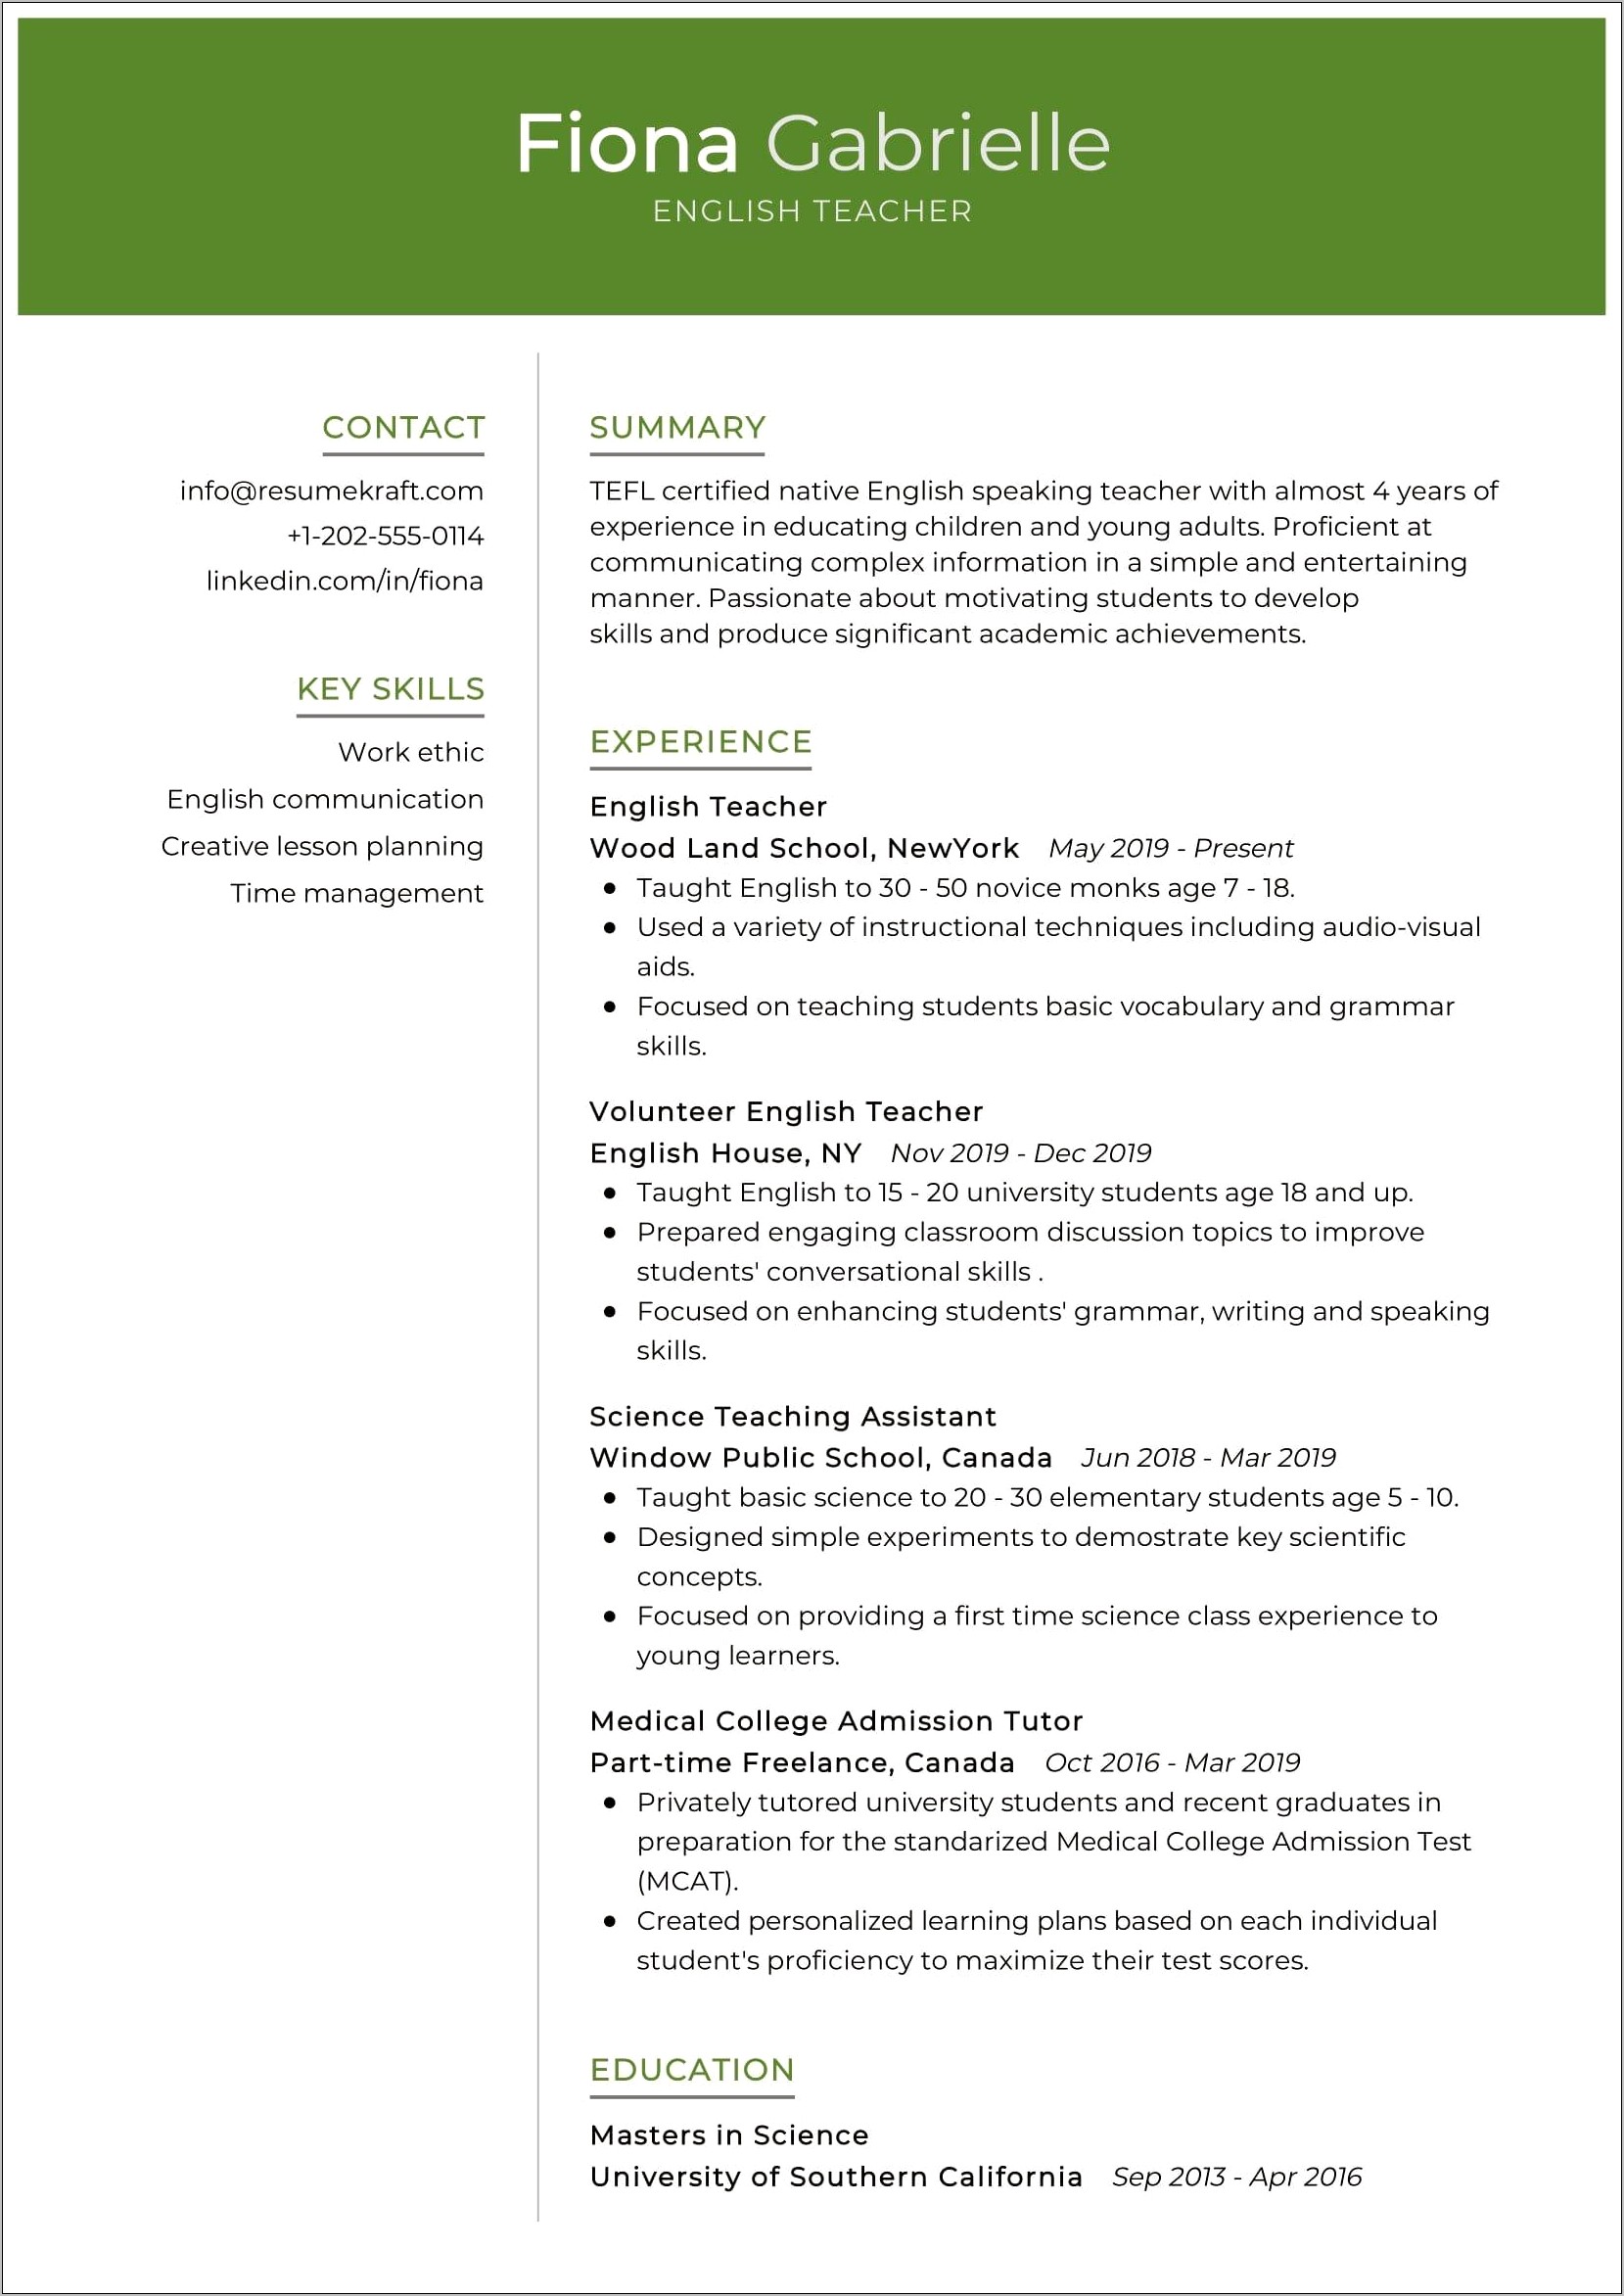 Objective Resume Samples Health Part Time